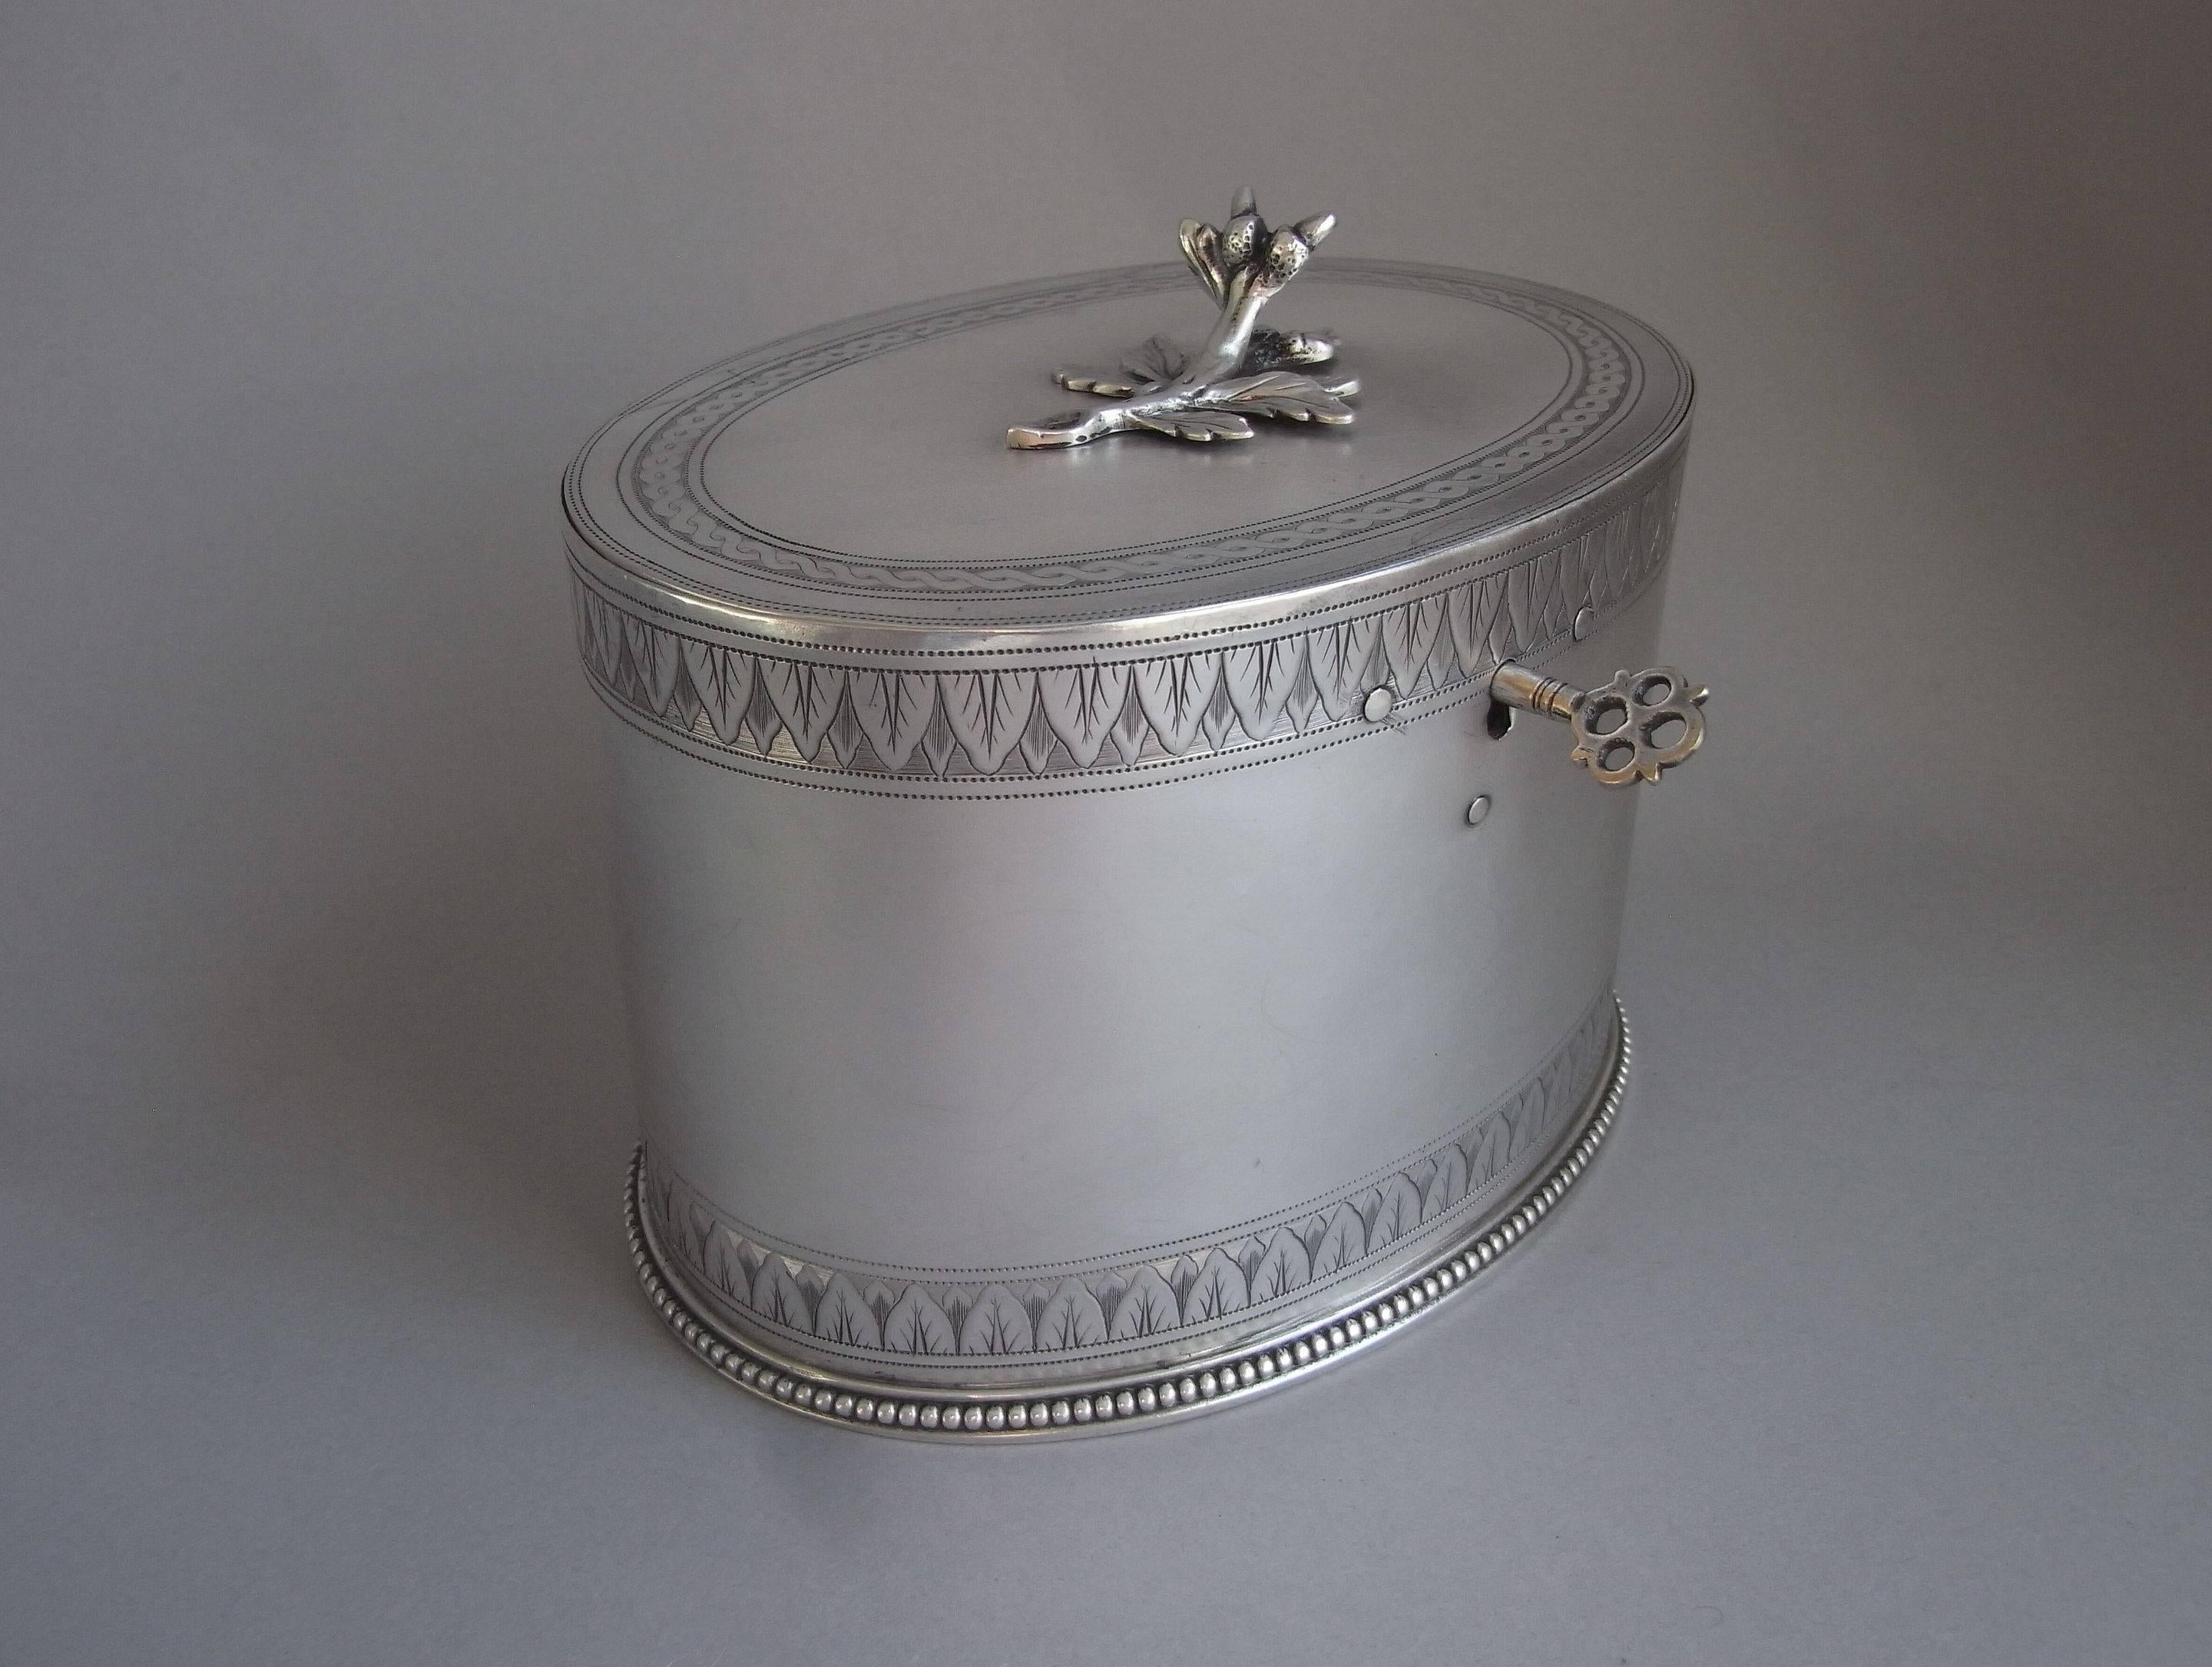 The tea caddy is oval in form with a beaded base. The sides display two very unusual horizontal bands of engraving depicting foliate motifs in sizes, the first time we have seen this design coming from Hester's workshops. The rear of the tea caddy